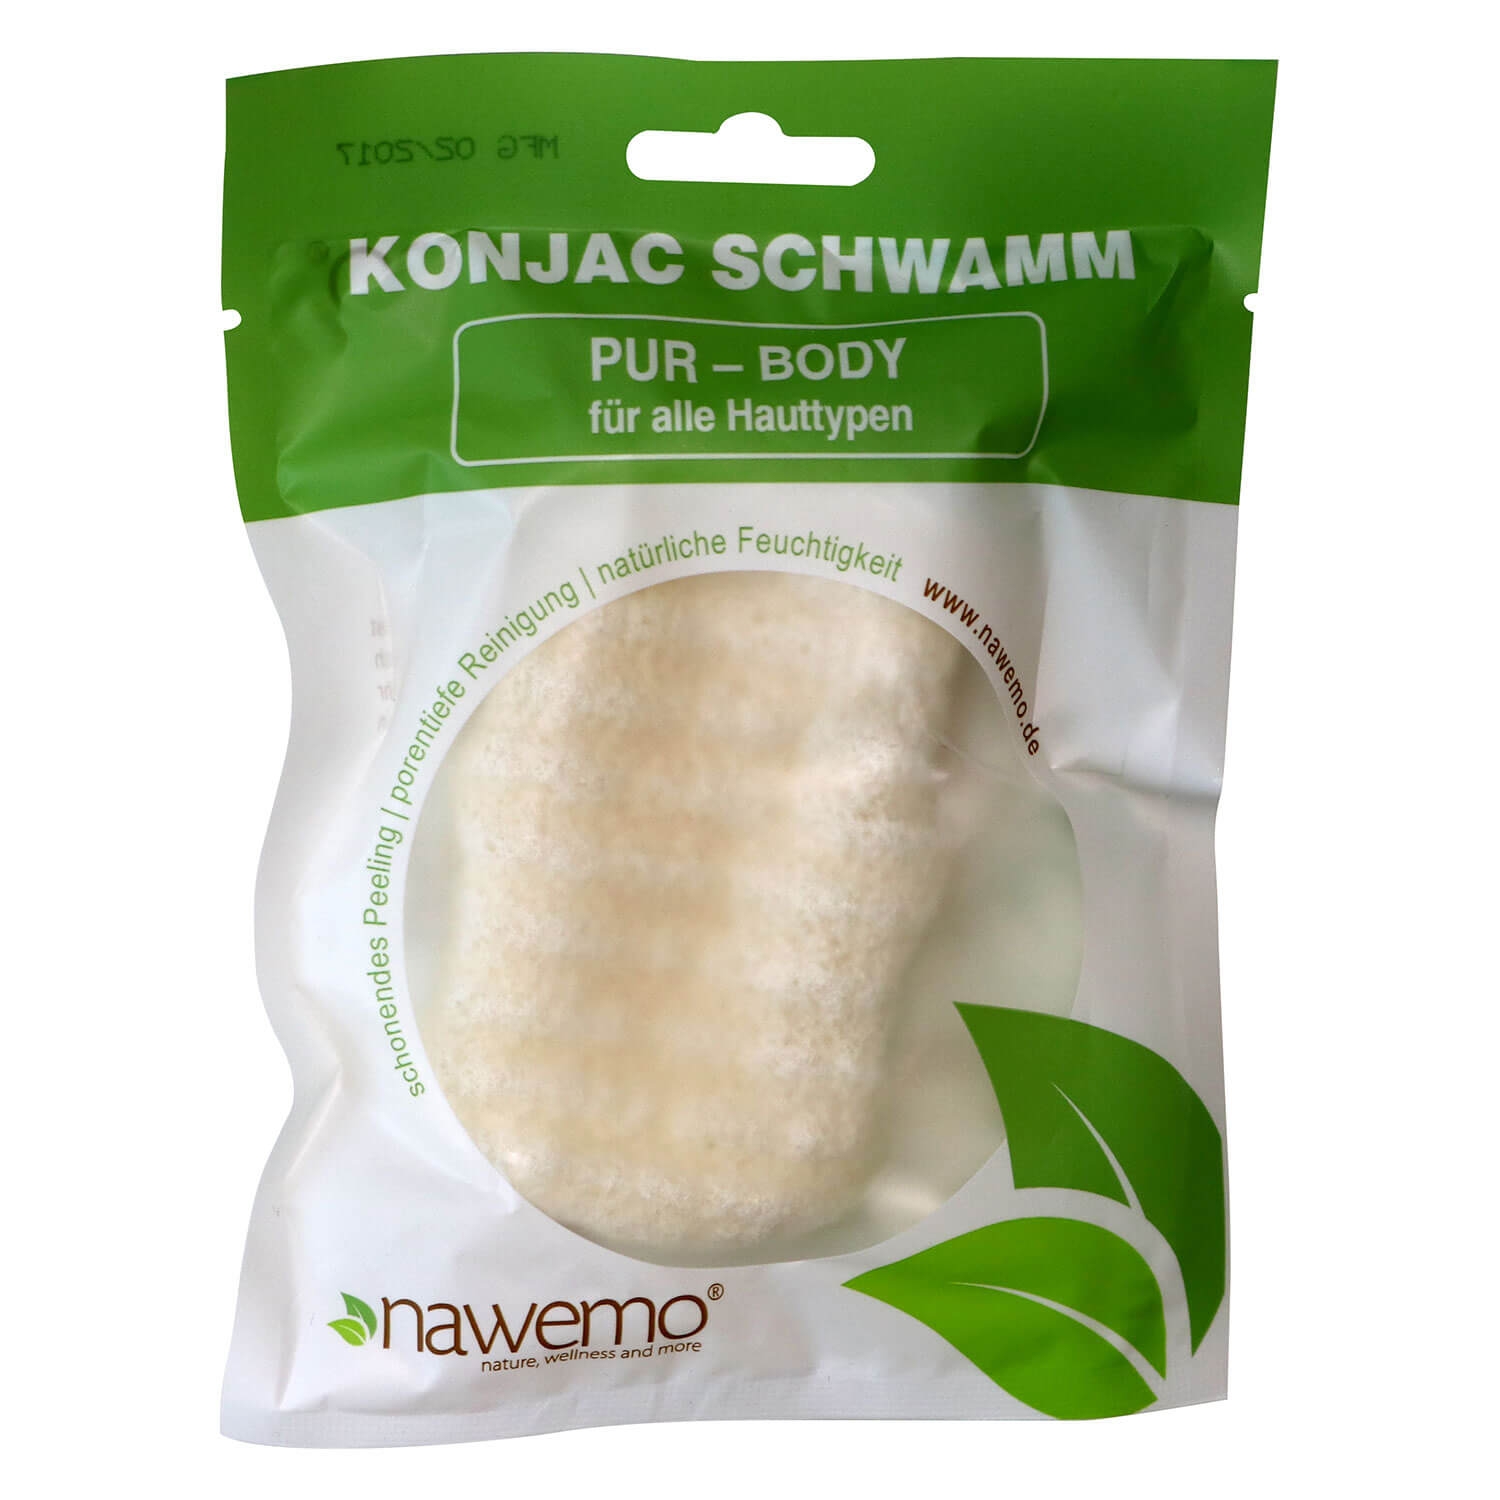 Product image from nawemo - Konjac Körperschwamm PUR BODY